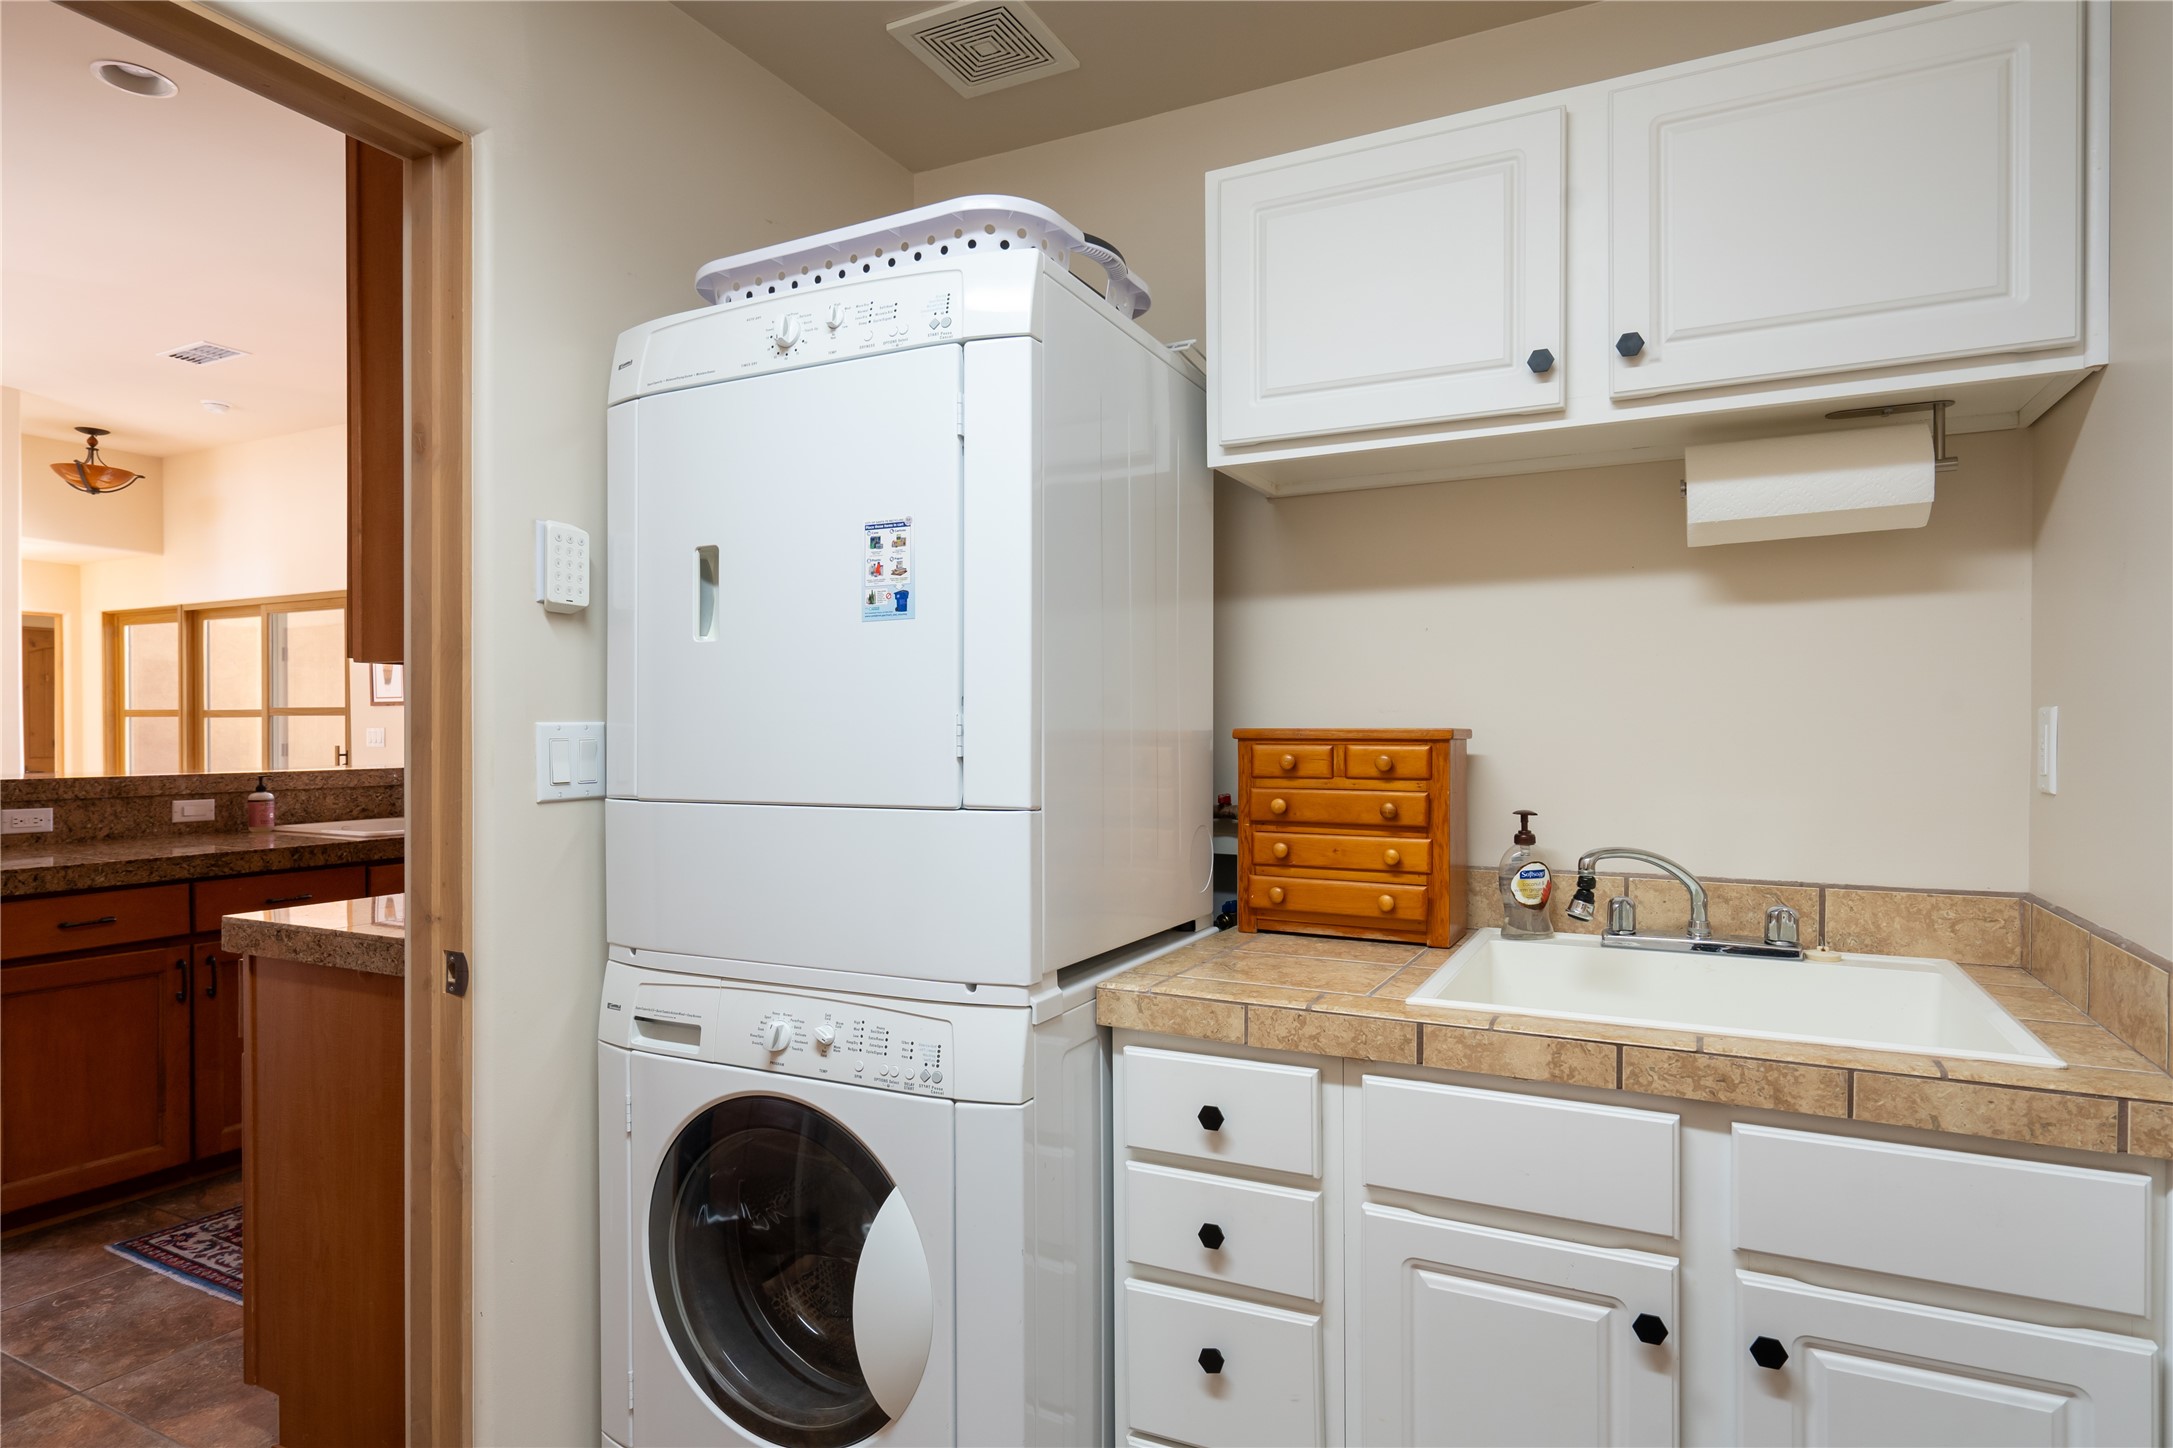 Laundry Room located between kitchen and garage